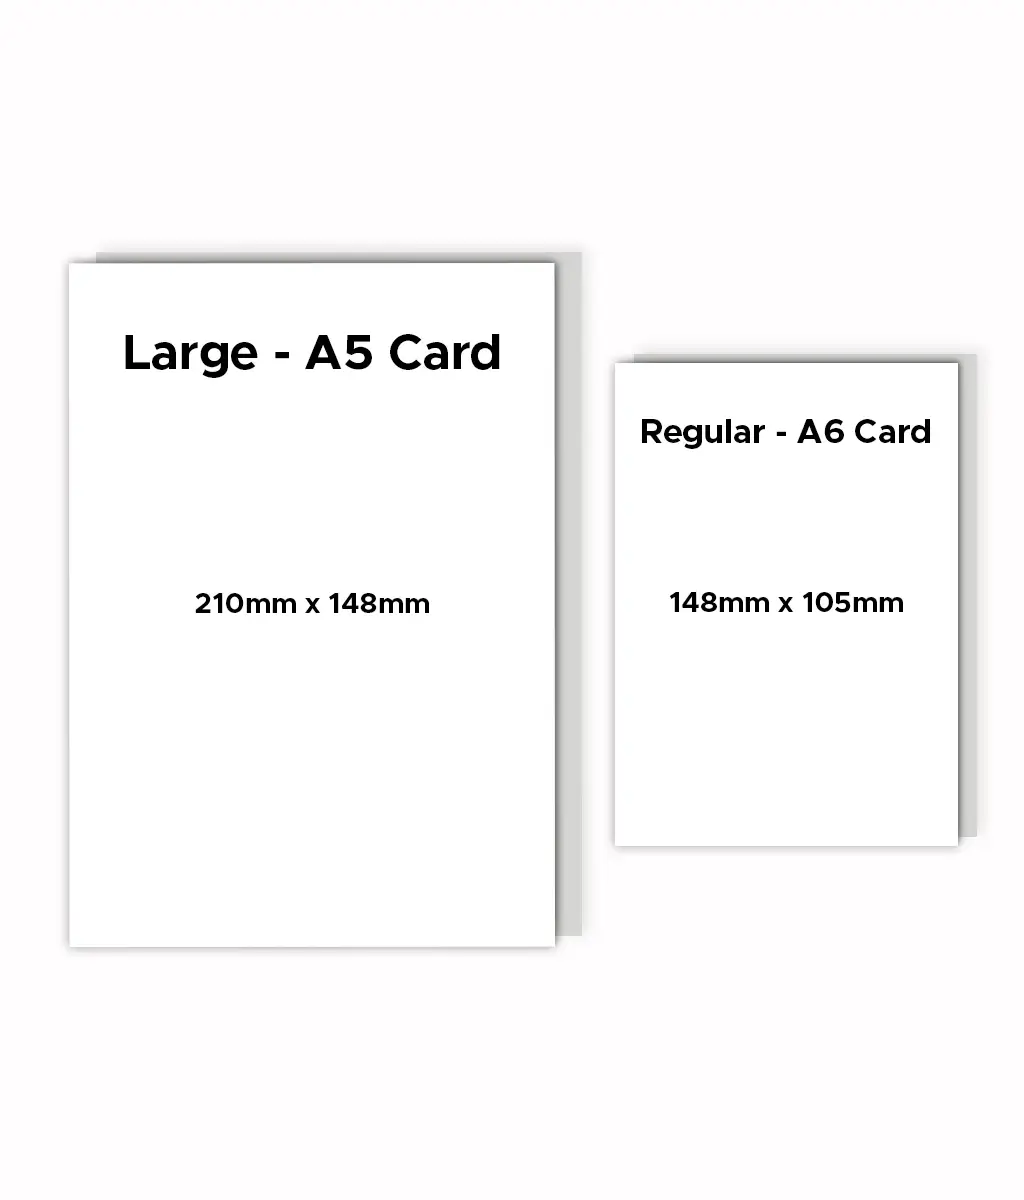 greeting card sizes regular a6 and large a5